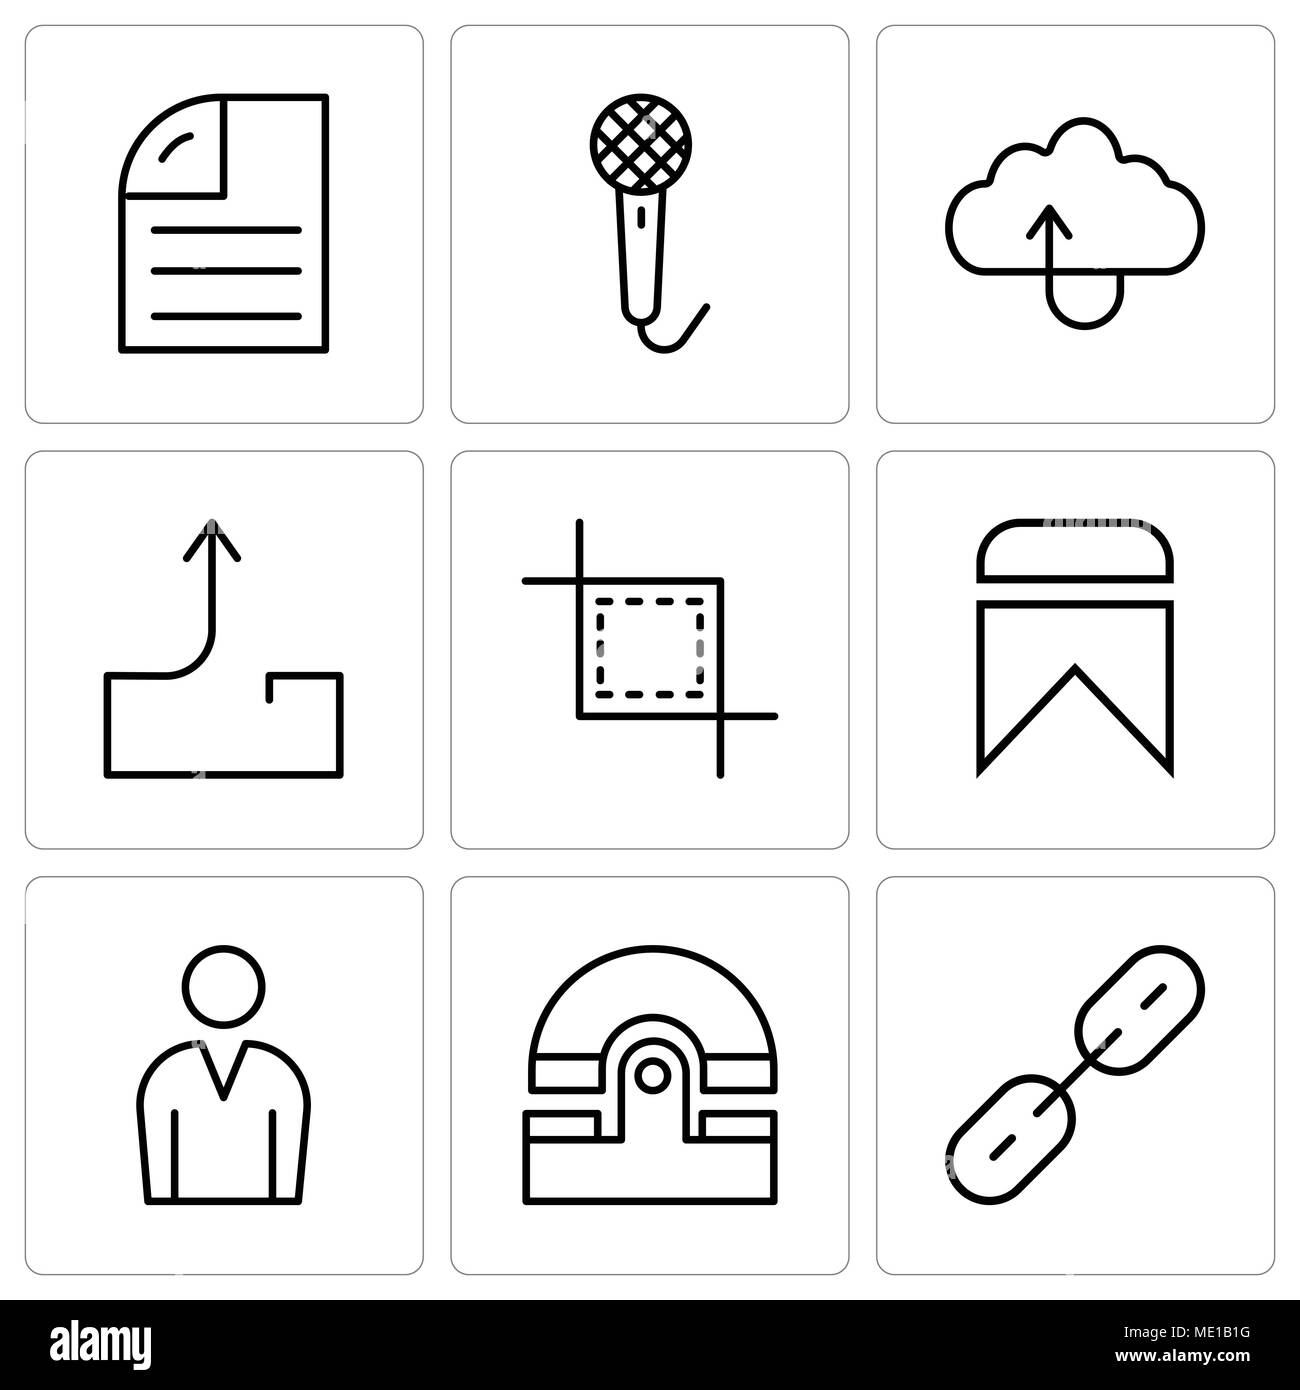 Set Of 9 simple editable icons such as Chain links, Old phone, Male avatar, Bookmark, Cropping tool, Outbox send mail, Uploading files to the cloud, V Stock Vector